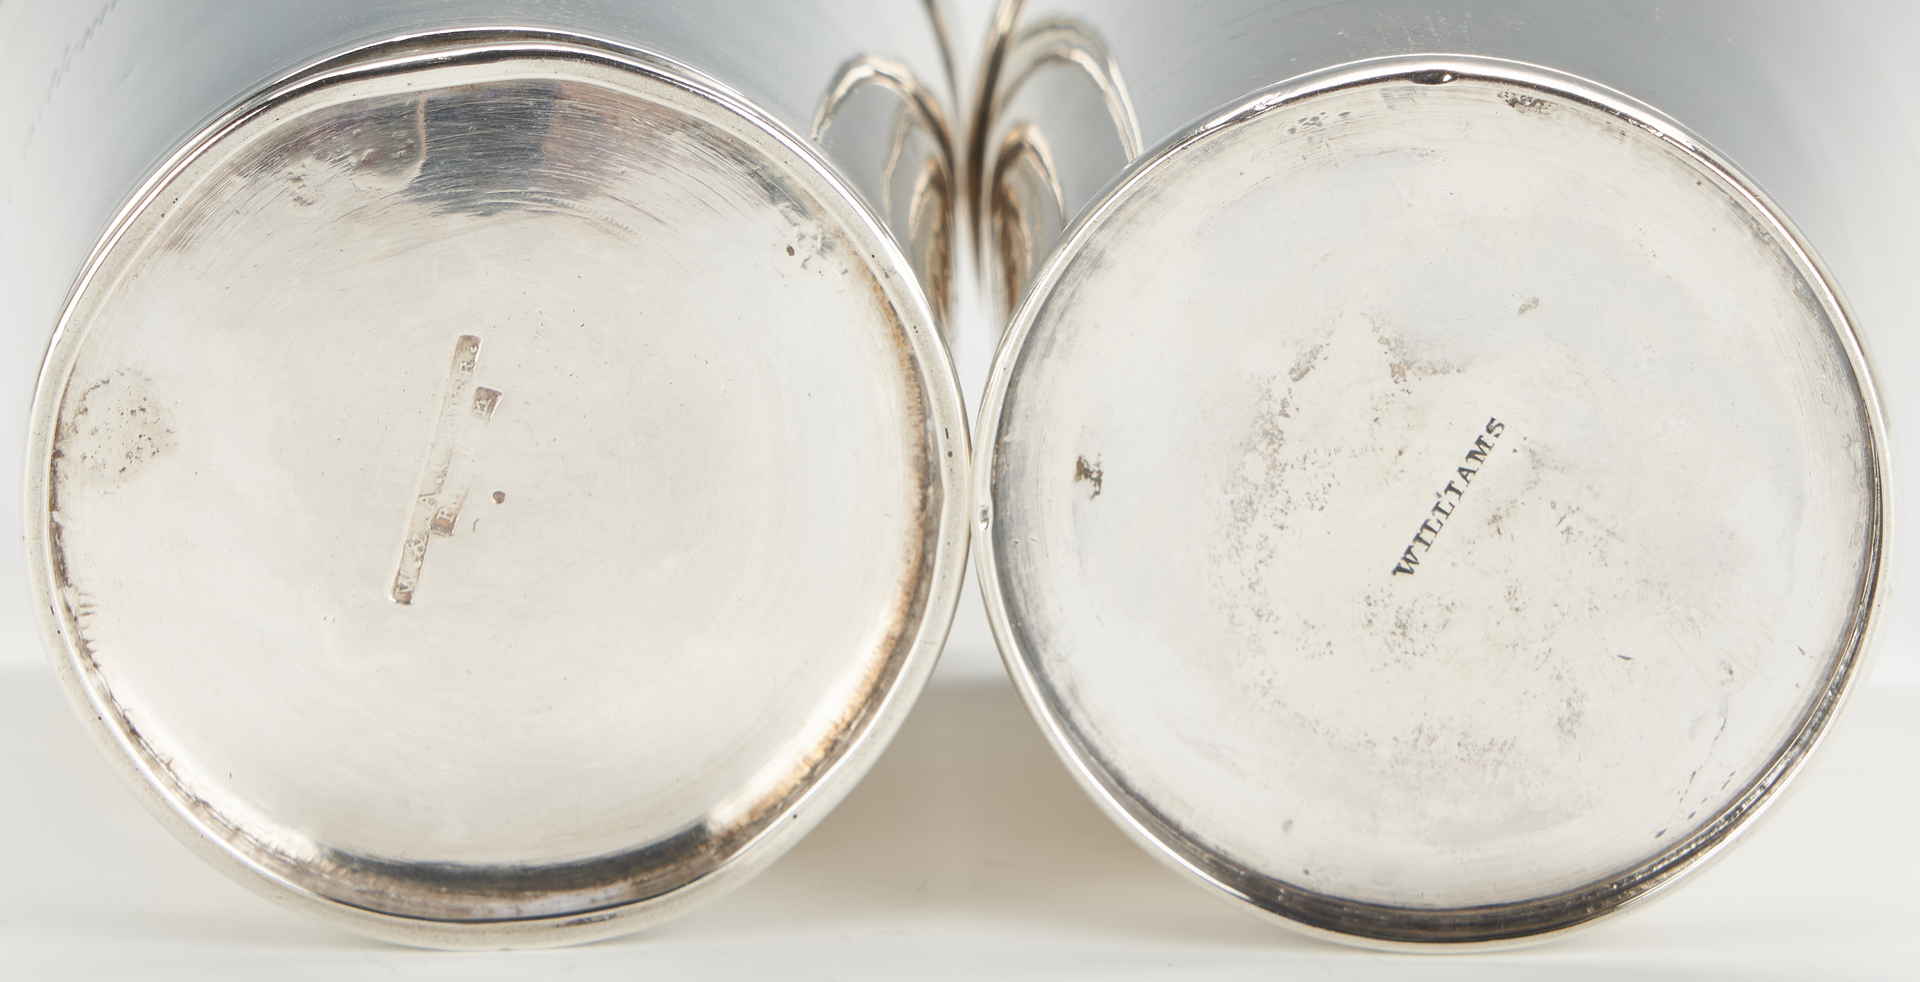 Lot 770: 2 Coin Silver Juleps, W. & A. Cooper and G. Williams